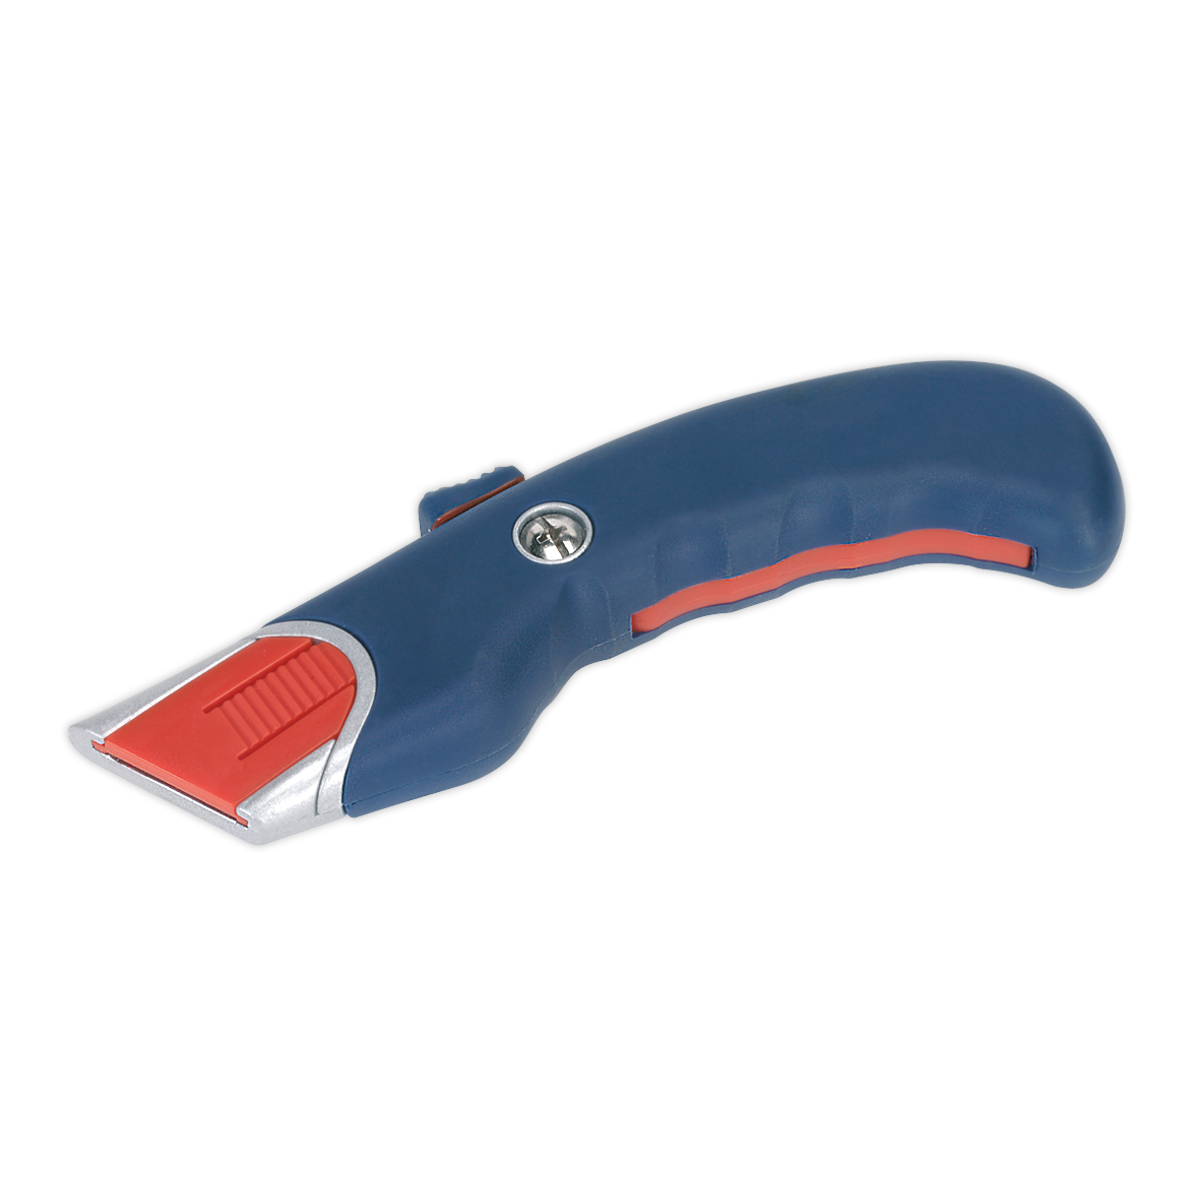 Safety Knife Auto-Retracting - AK8631 - Farming Parts